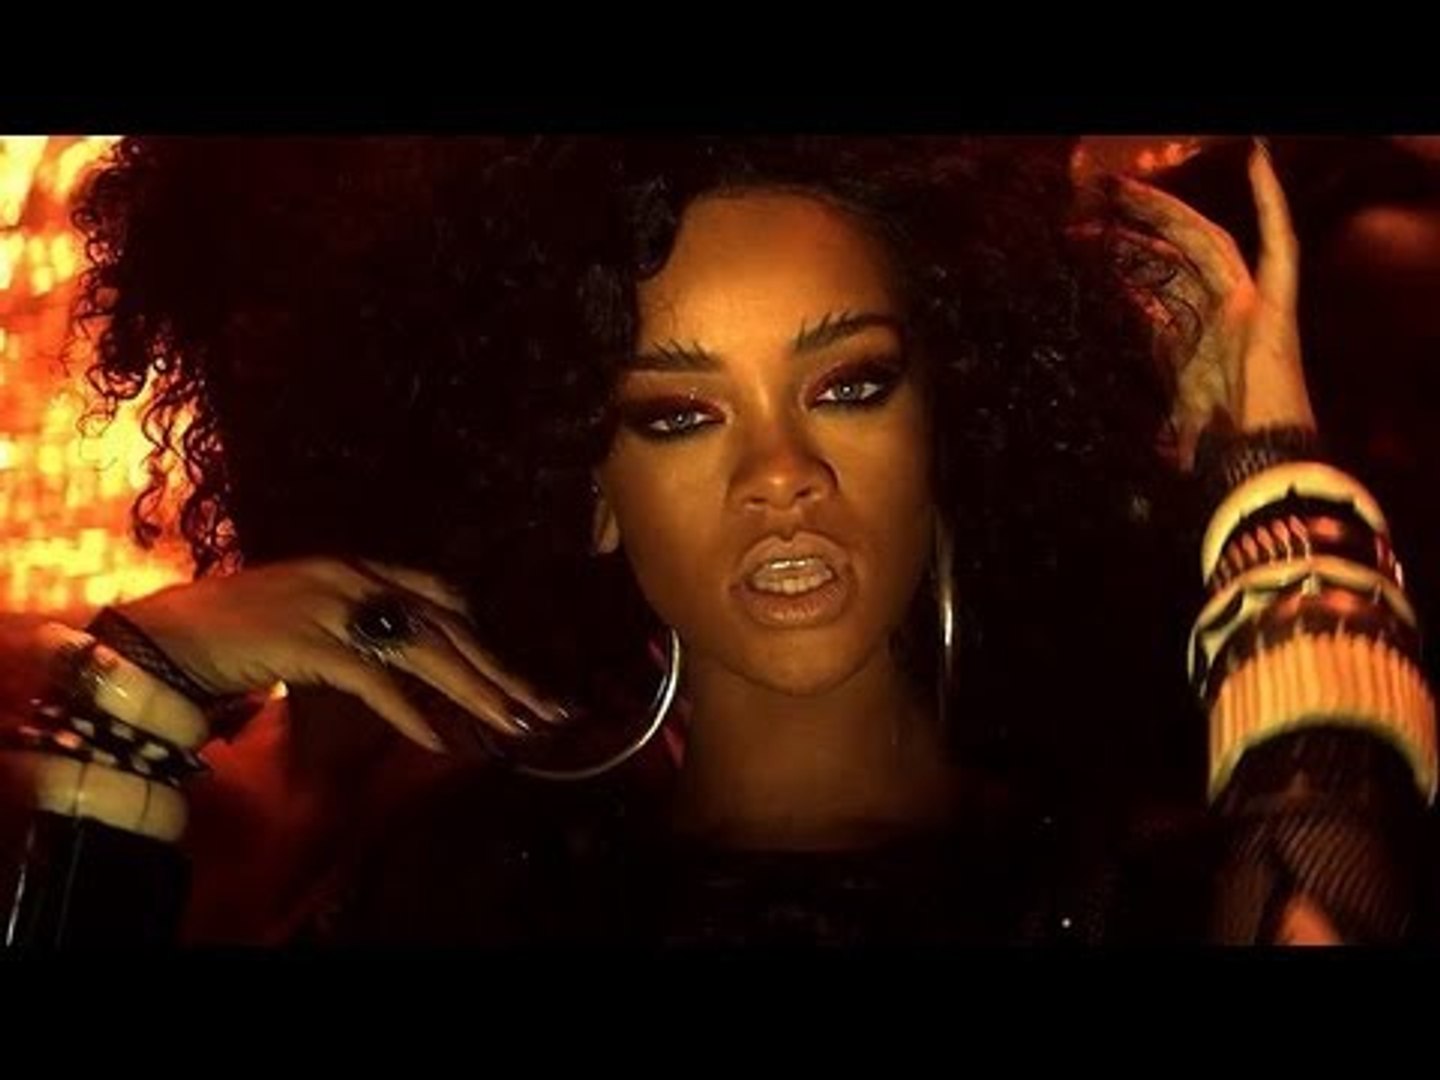 Rihanna Where Have You Been Music Video Fashion! - video Dailymotion